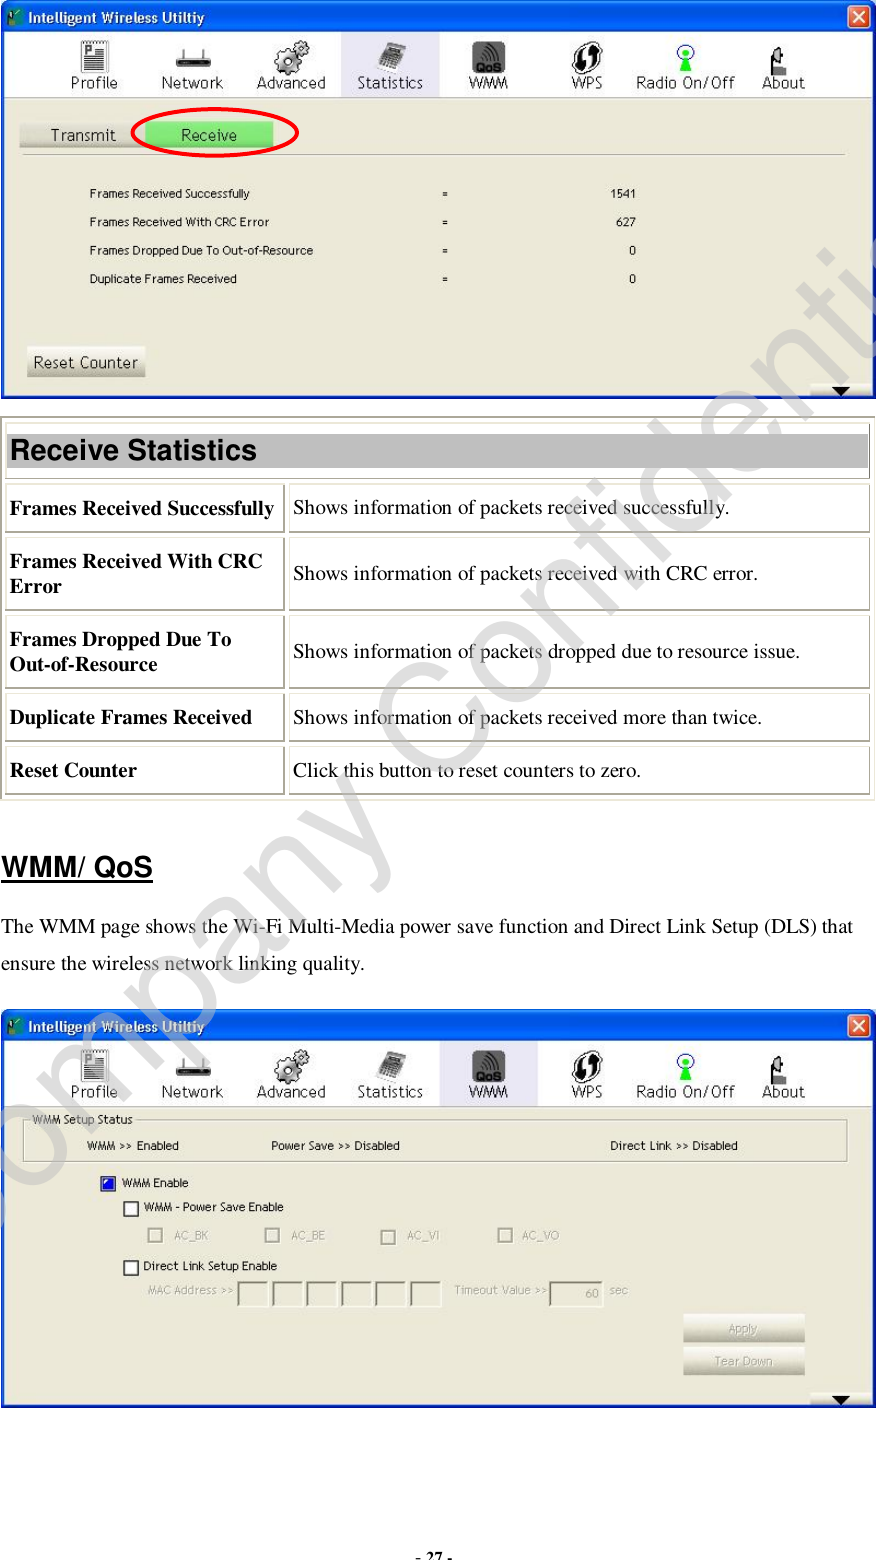  - 27 -  Receive Statistics Frames Received Successfully Shows information of packets received successfully. Frames Received With CRC Error  Shows information of packets received with CRC error. Frames Dropped Due To Out-of-Resource  Shows information of packets dropped due to resource issue. Duplicate Frames Received  Shows information of packets received more than twice. Reset Counter  Click this button to reset counters to zero.  WMM/ QoS The WMM page shows the Wi-Fi Multi-Media power save function and Direct Link Setup (DLS) that ensure the wireless network linking quality.  Company Confidential